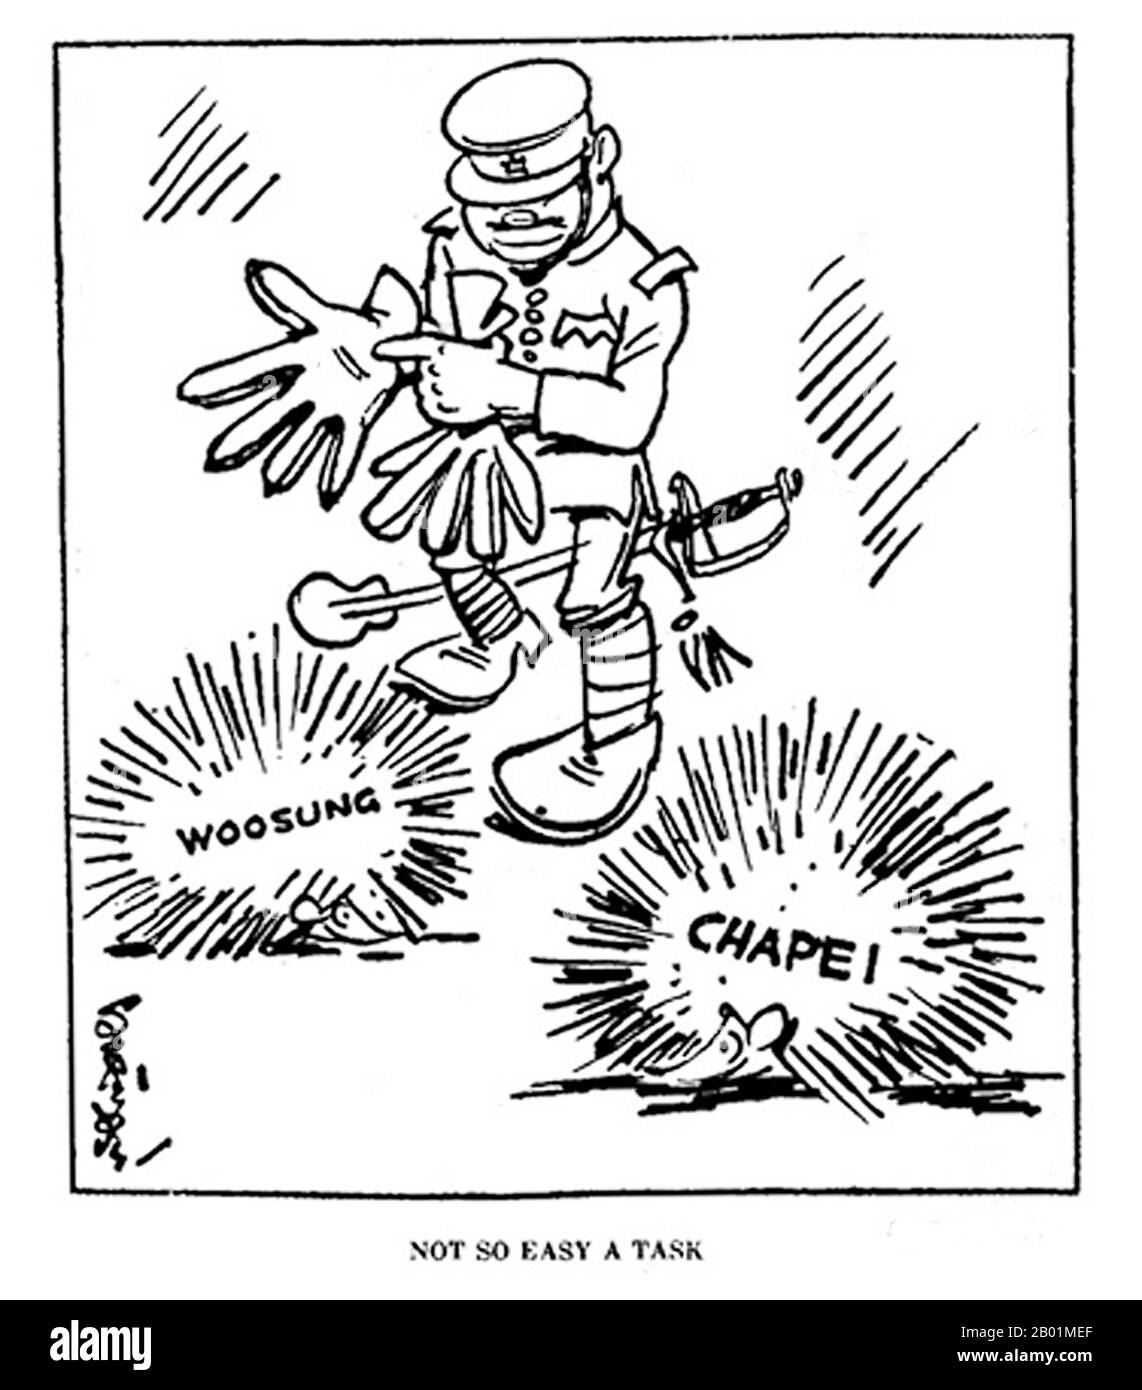 China: Japanese militarism in the Shanghai suburbs of Woosung and Chapei. A cartoon by 'Sapajou' Georgii Sapojnikoff (1893-1949), White Russian exile and cartoonist at the North China Daily News, Shanghai, 1925-1940.  Sapajou was the artistic nom de plume of Georgii Avksentievich Sapojnikoff, one-time Lieutenant of the Russian Imperial Army. He was a graduate of the Aleksandrovskoe Military School in Moscow, and saw action in World War I, in which he was gravely wounded. As a result of his wounds, which left him with a pronounced limp for the rest of his life, he was invalided out of the army. Stock Photo